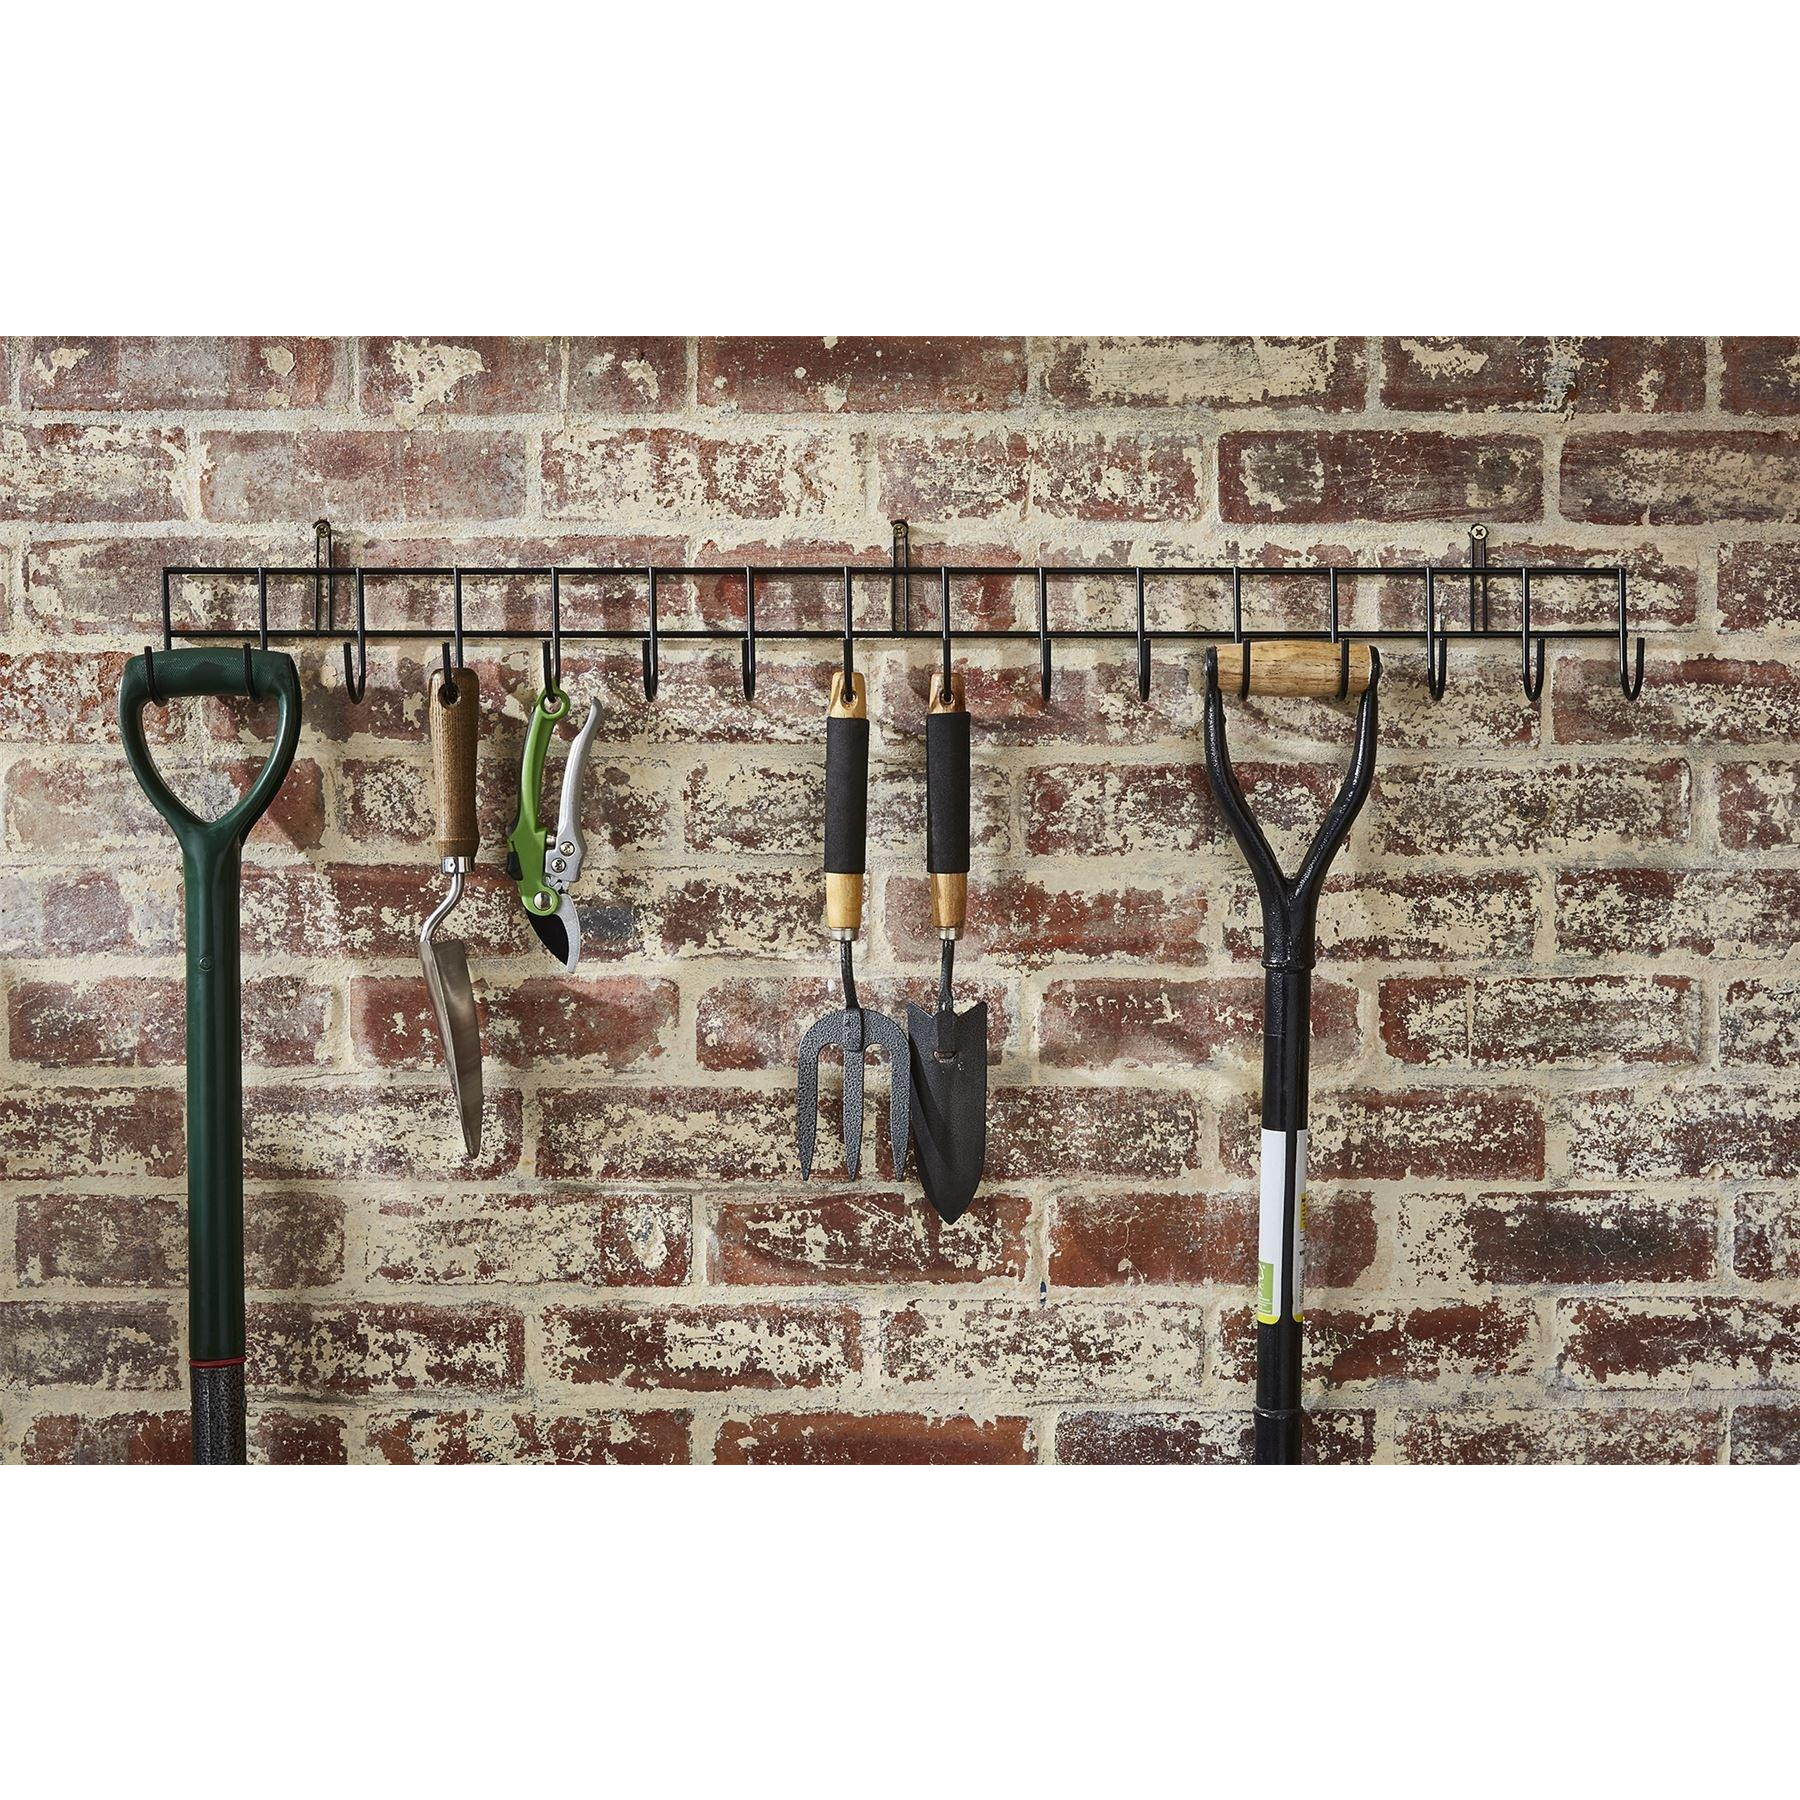 Garden Tool Wall Mounted Storage Rack Hook Holder Extra Long Shed Tidy Rail - image 1